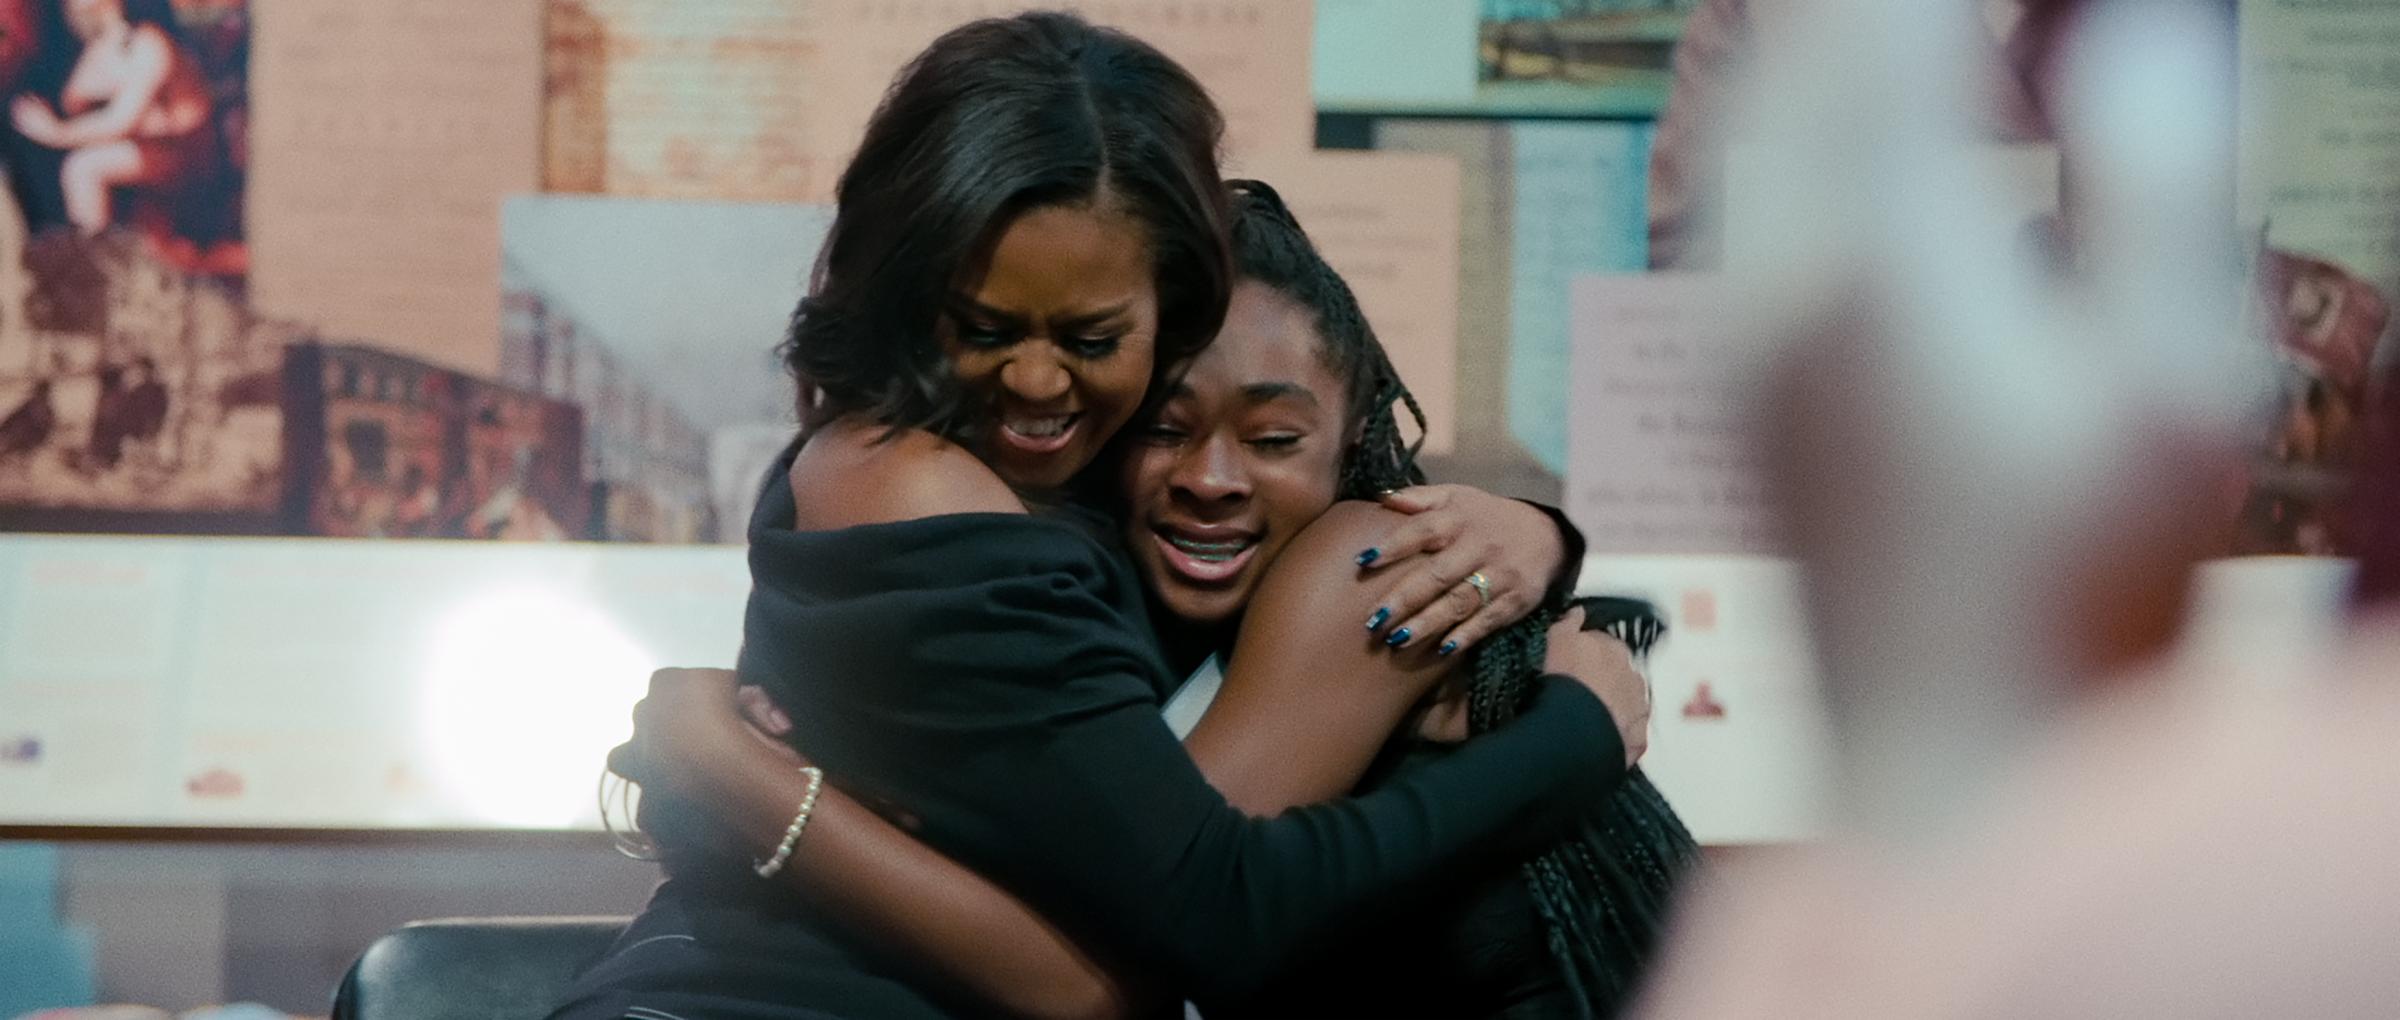 Michelle Obama in 'Becoming'